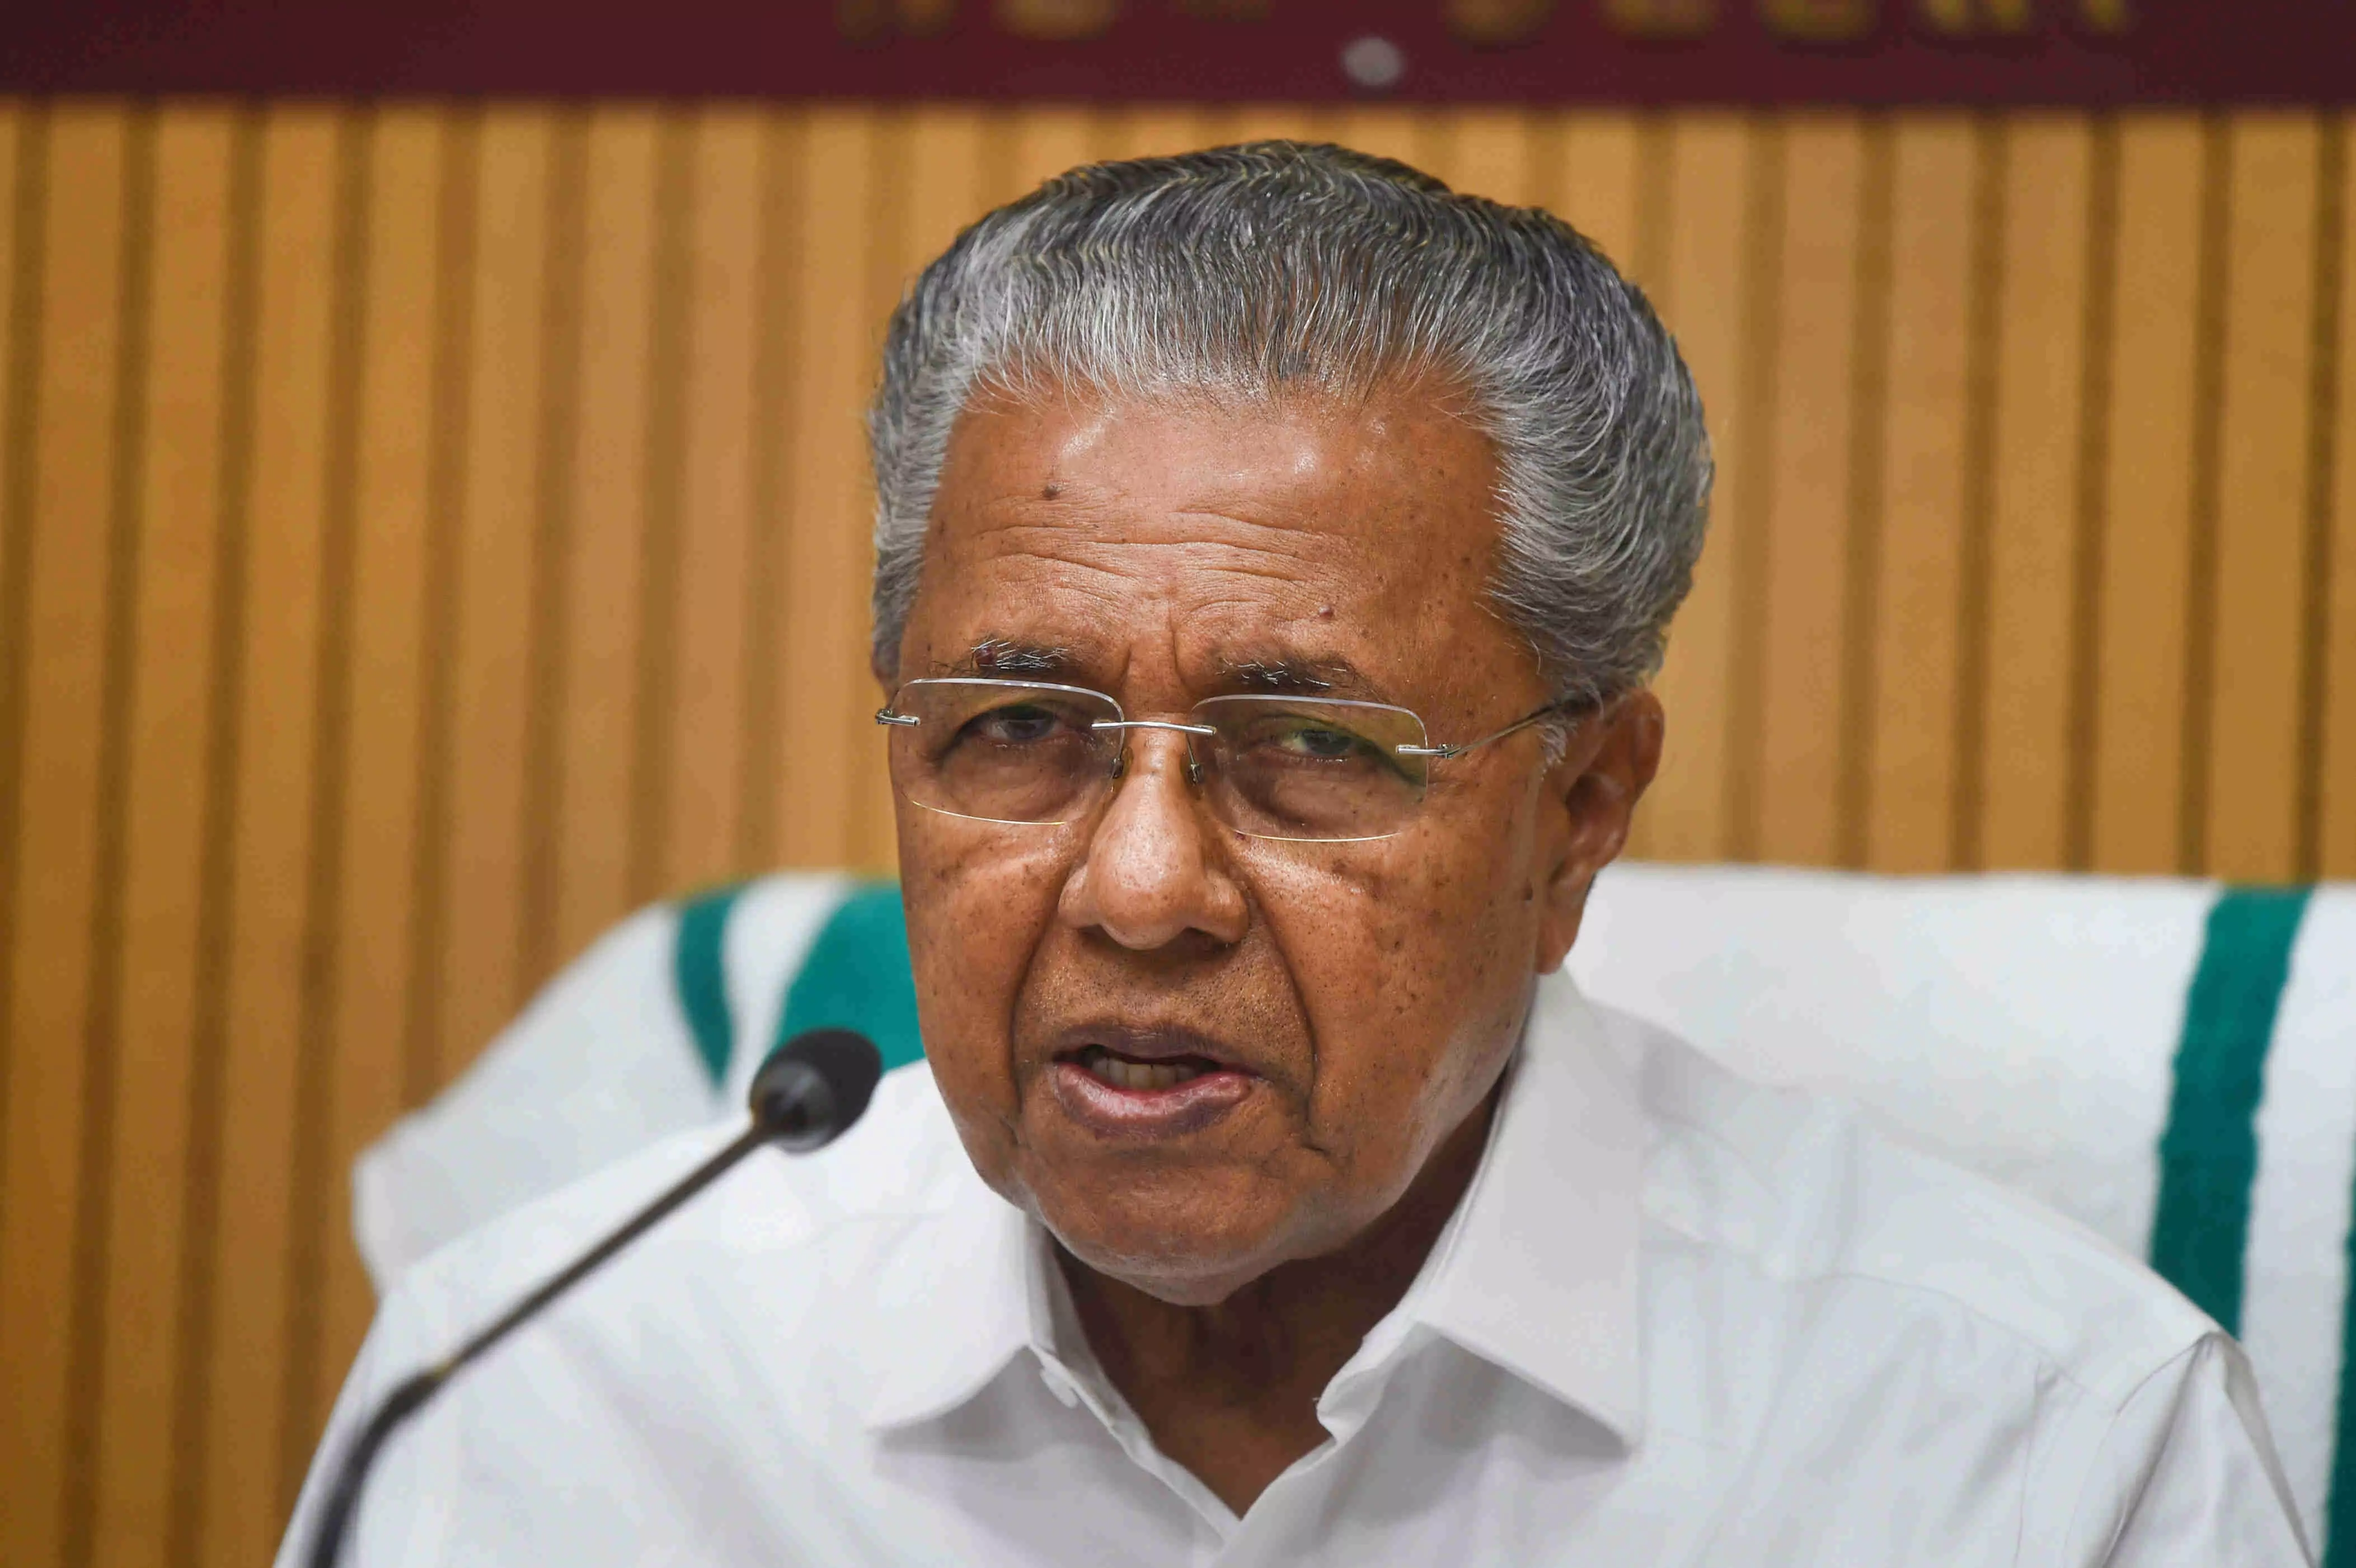 Attack on fact-finding team in Tripura highly condemnable, says Kerala CM